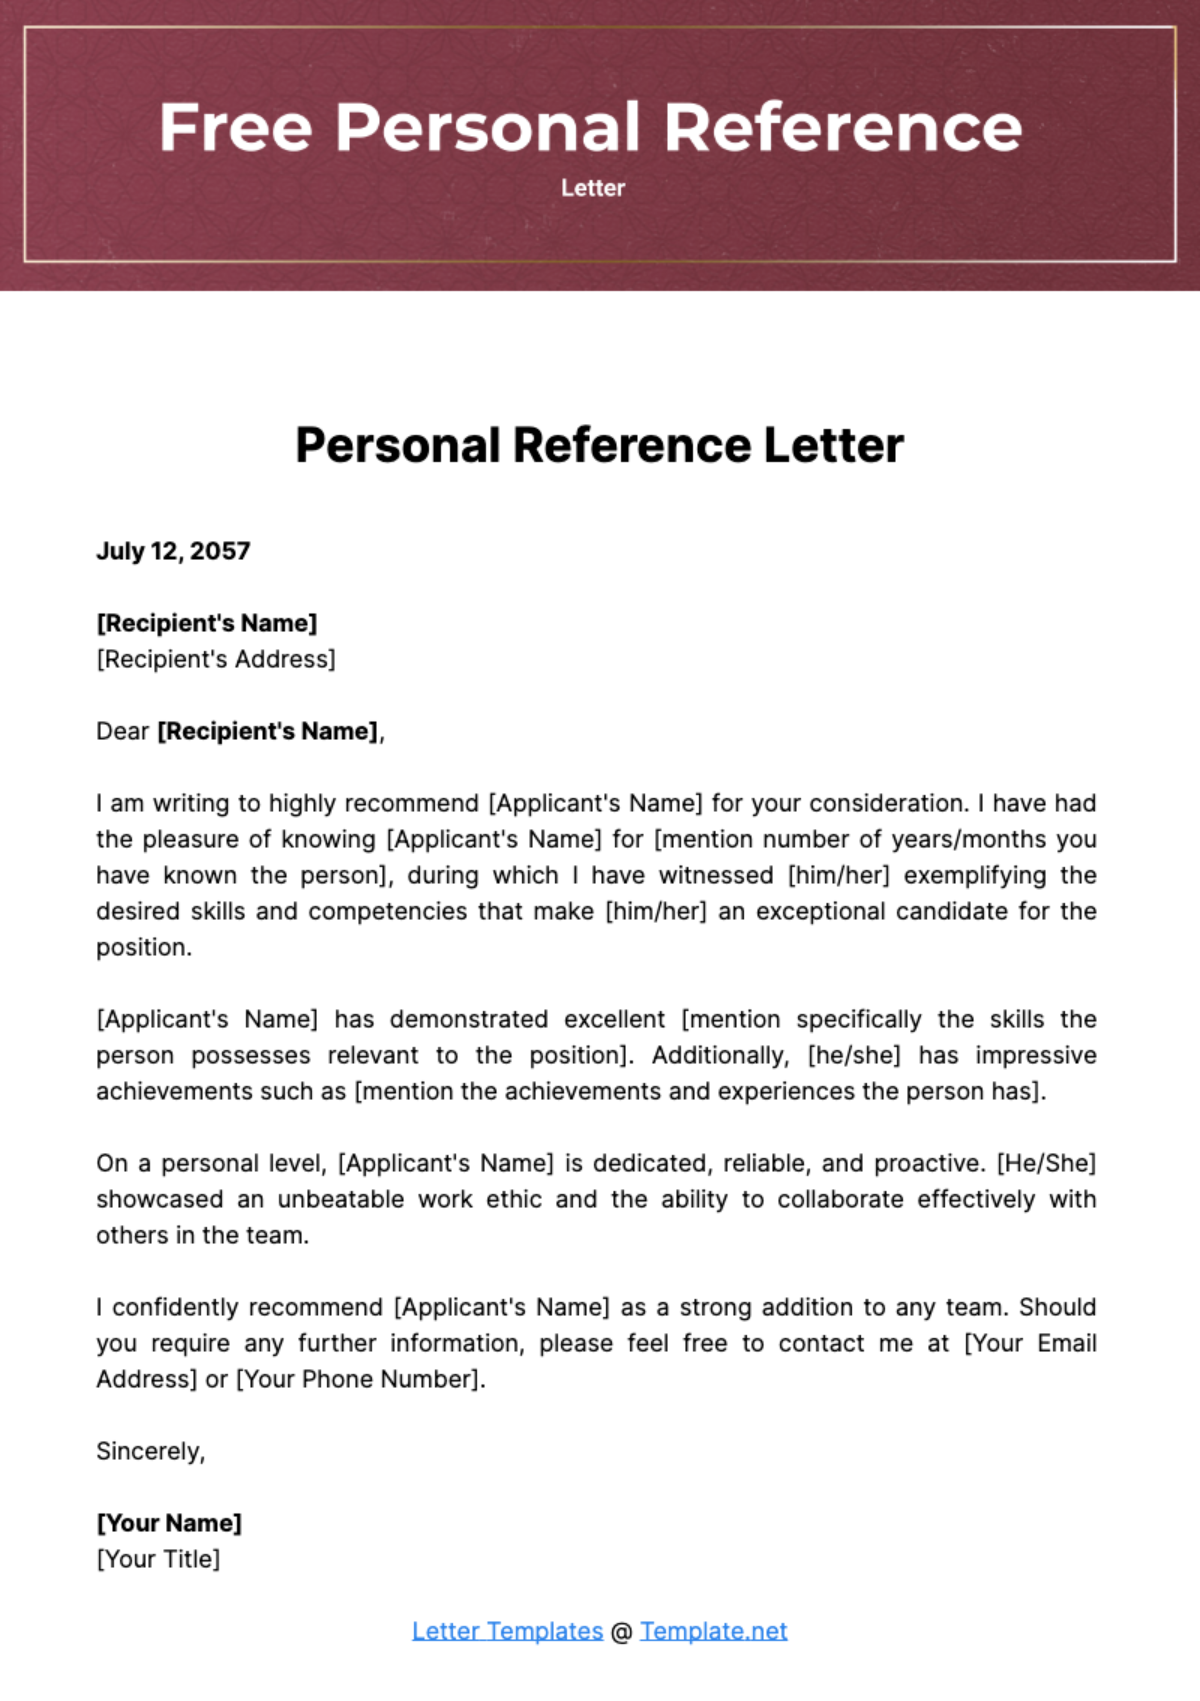 Free Personal Reference Letter Template